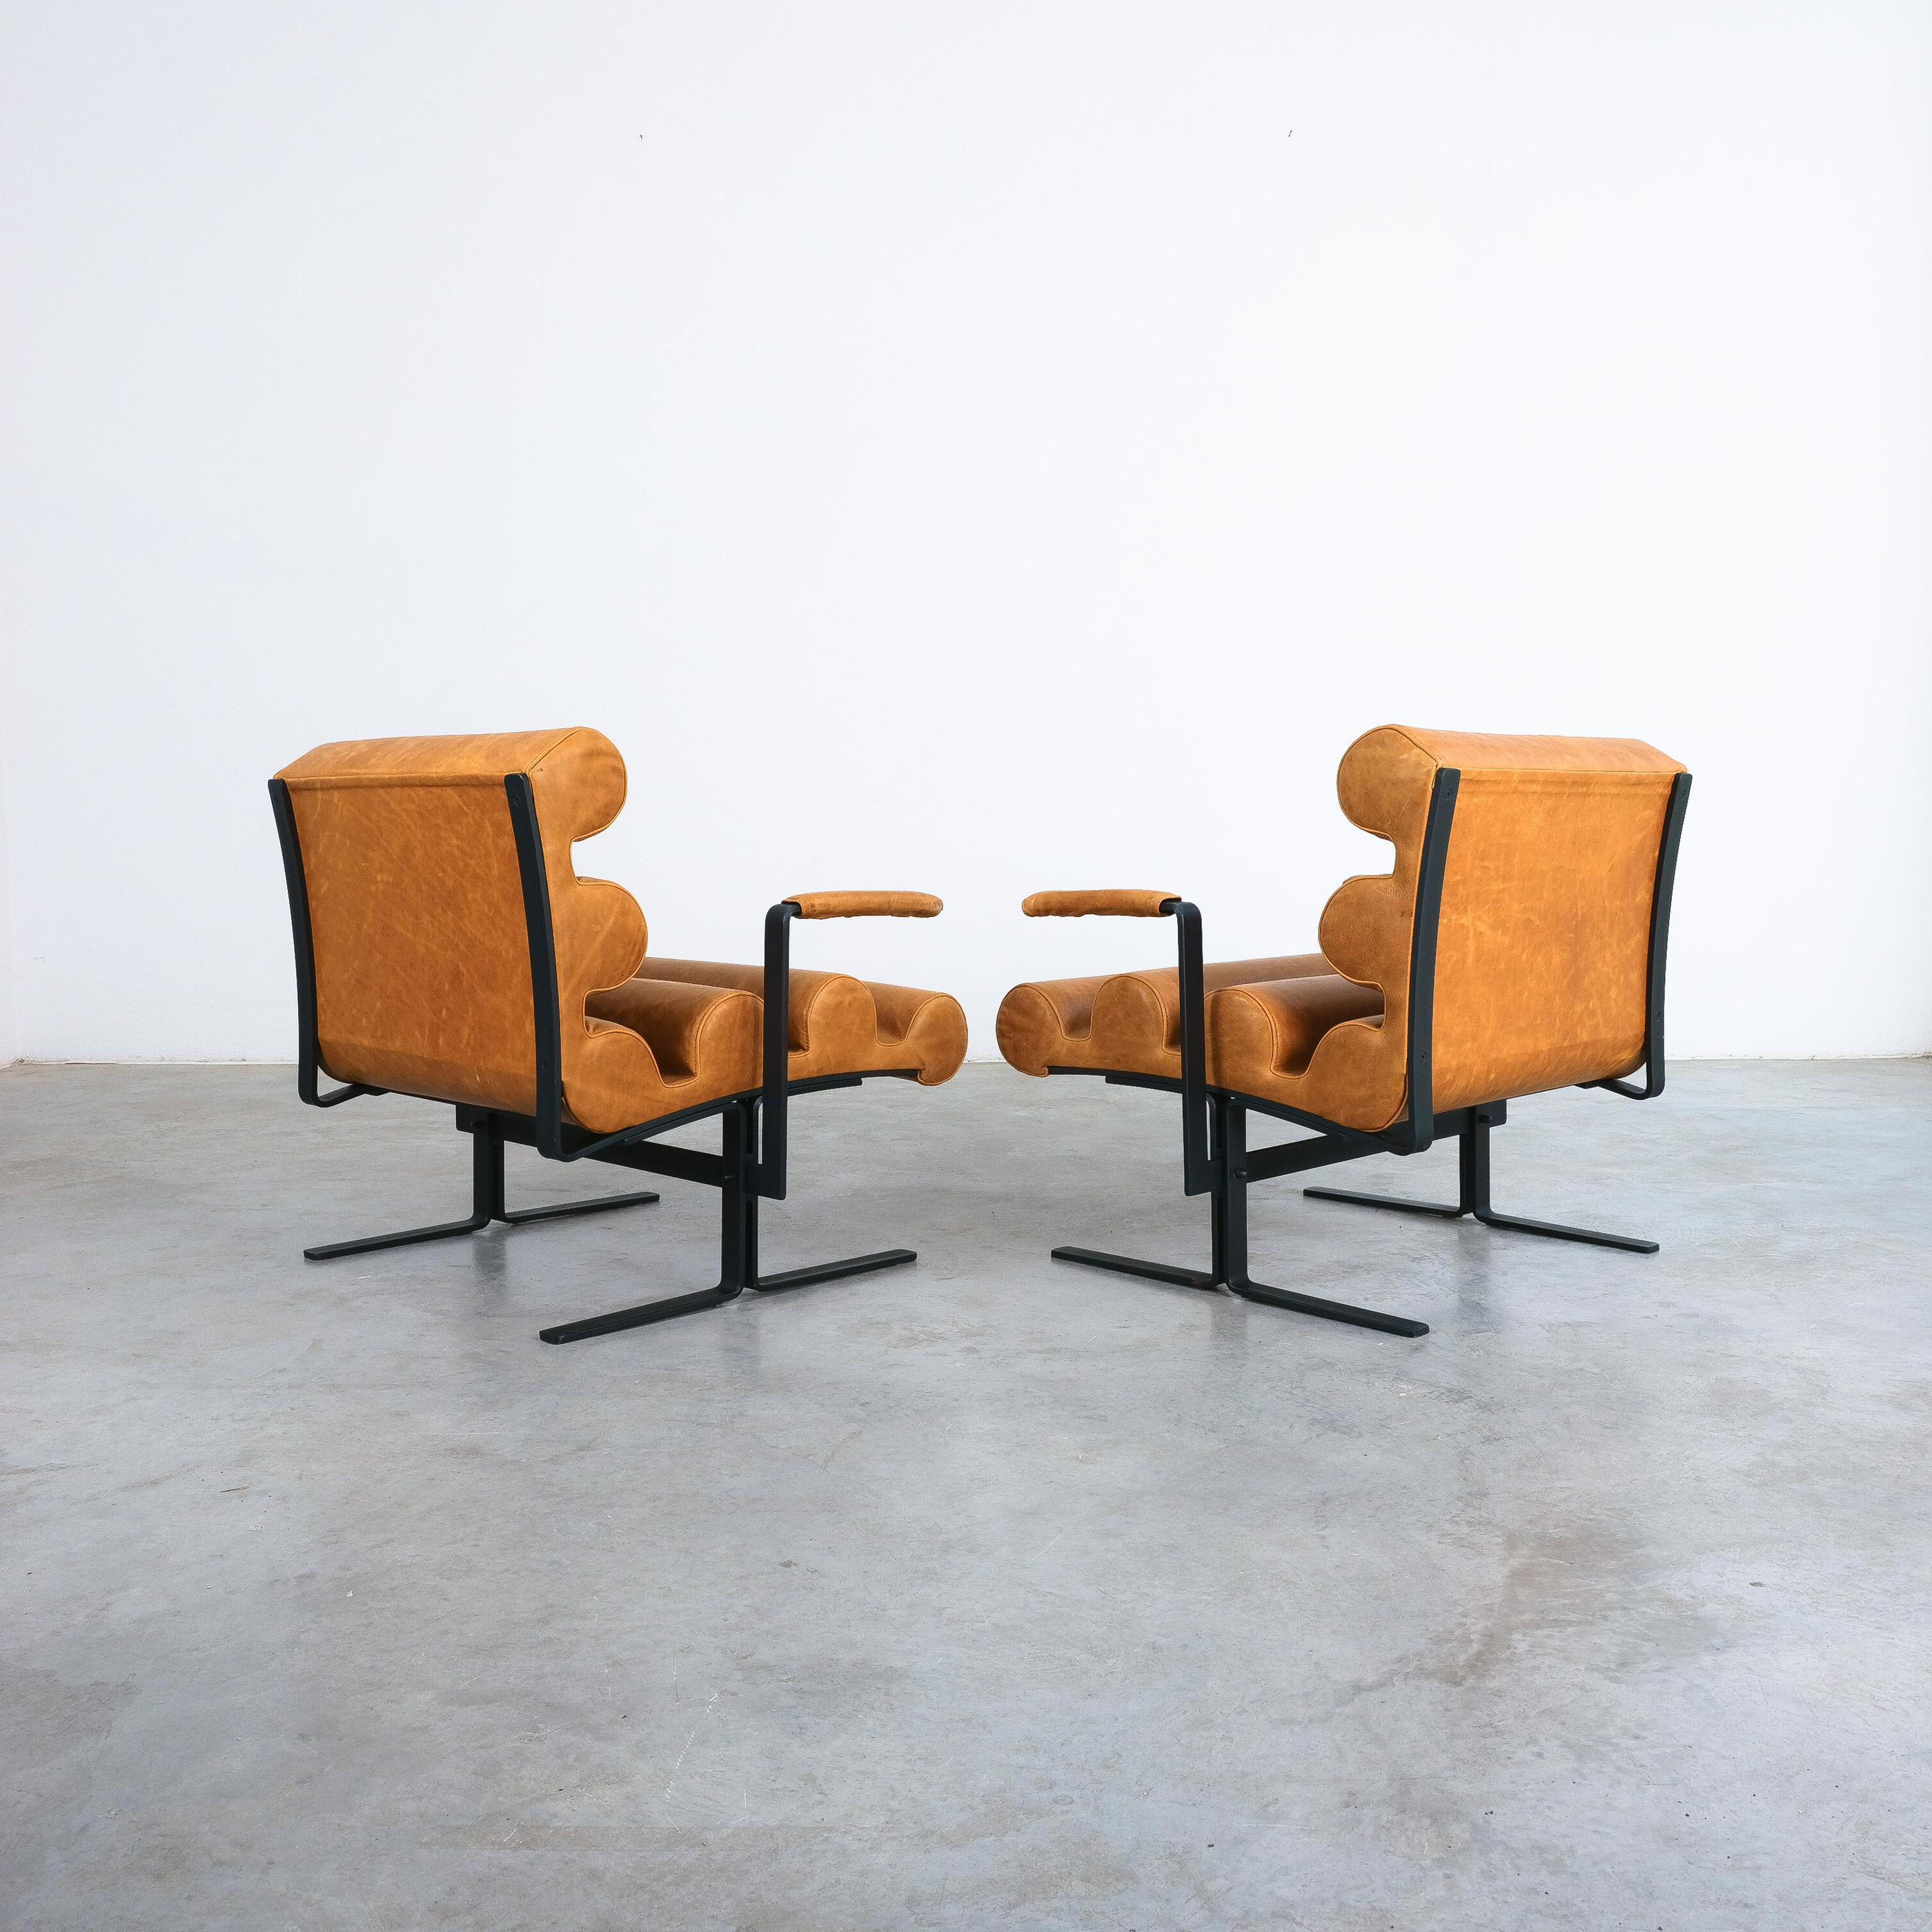 Joe Colombo For Sormani Roll Brown Leather Spring Steel Armchair Pair (2) , 1962 For Sale 9